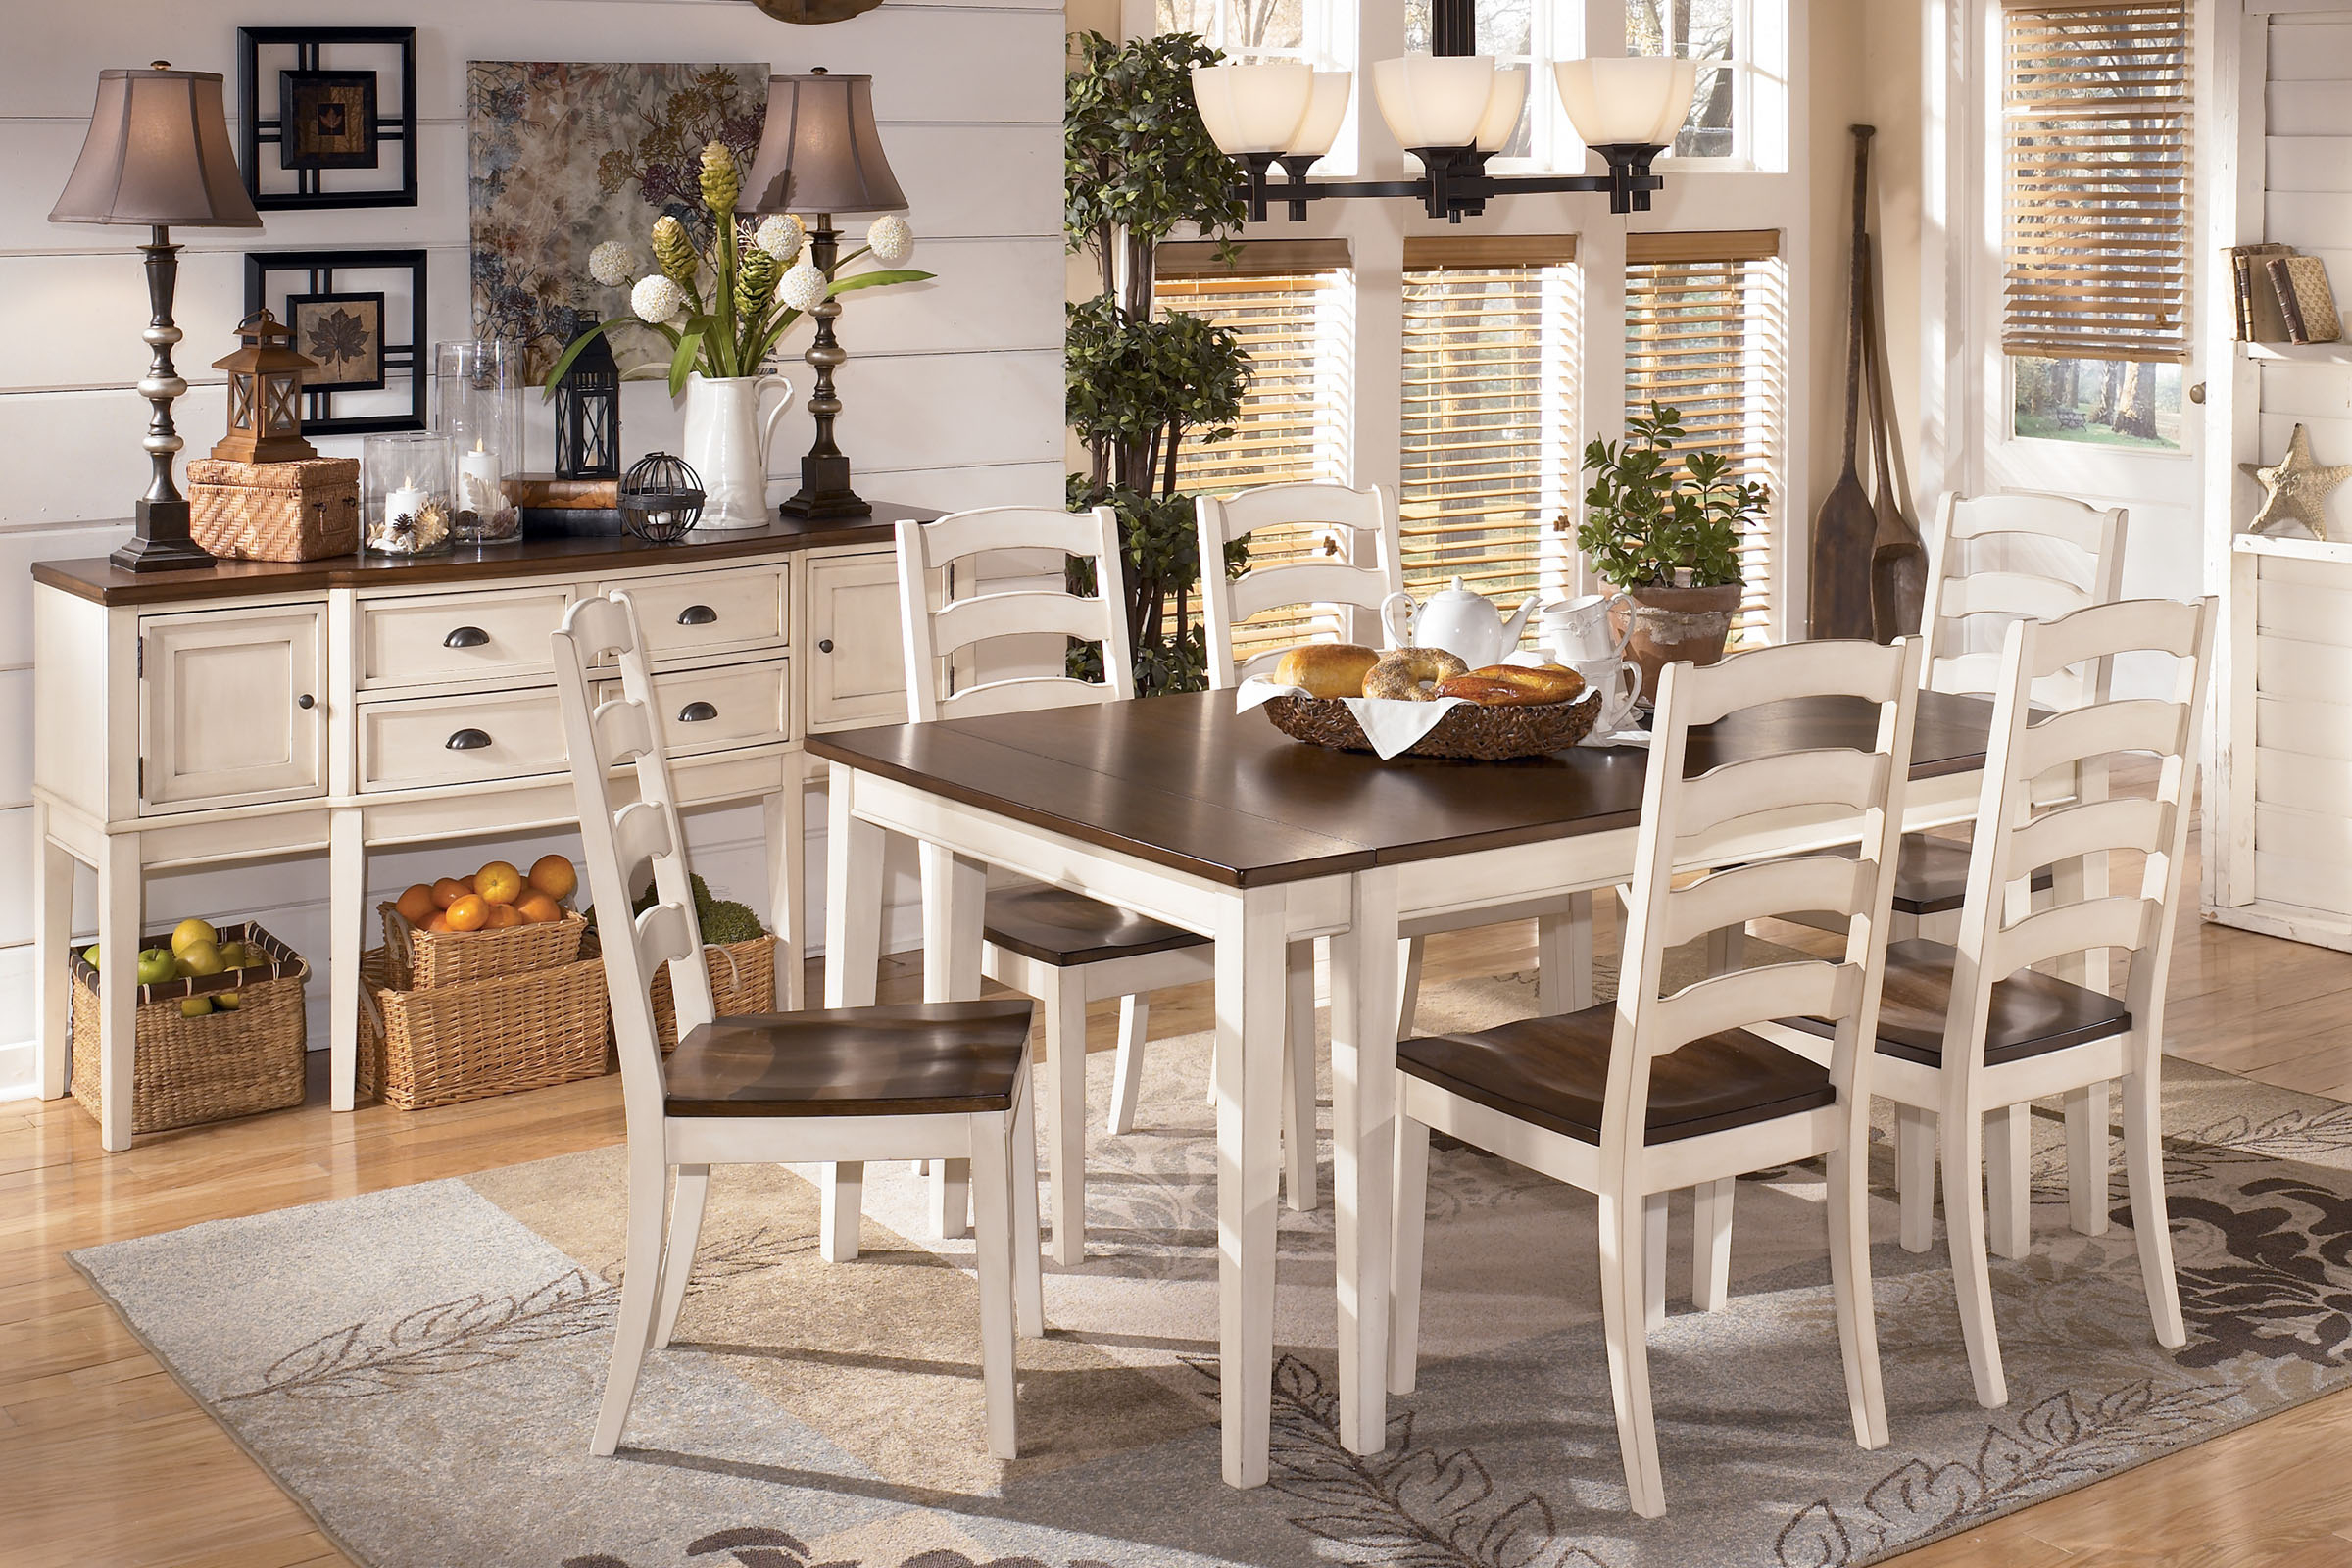 Whitesburg Dining Room Table And Chairs